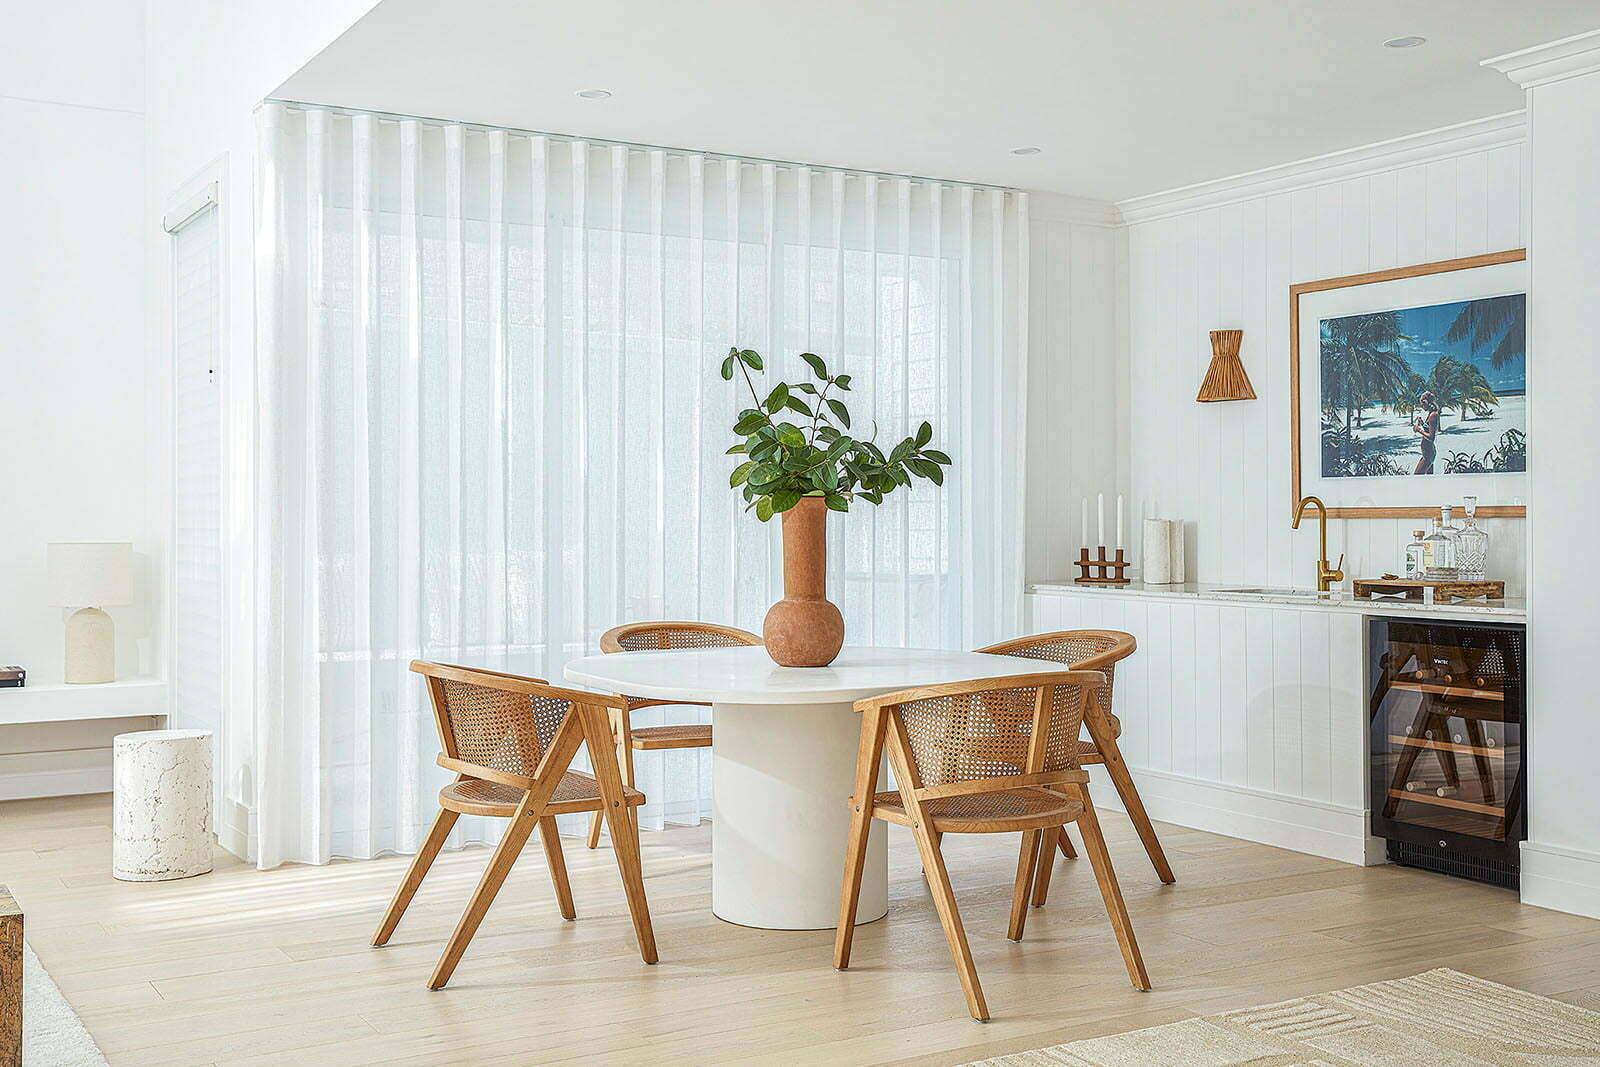 5 ways window coverings can freshen-up your home for summer